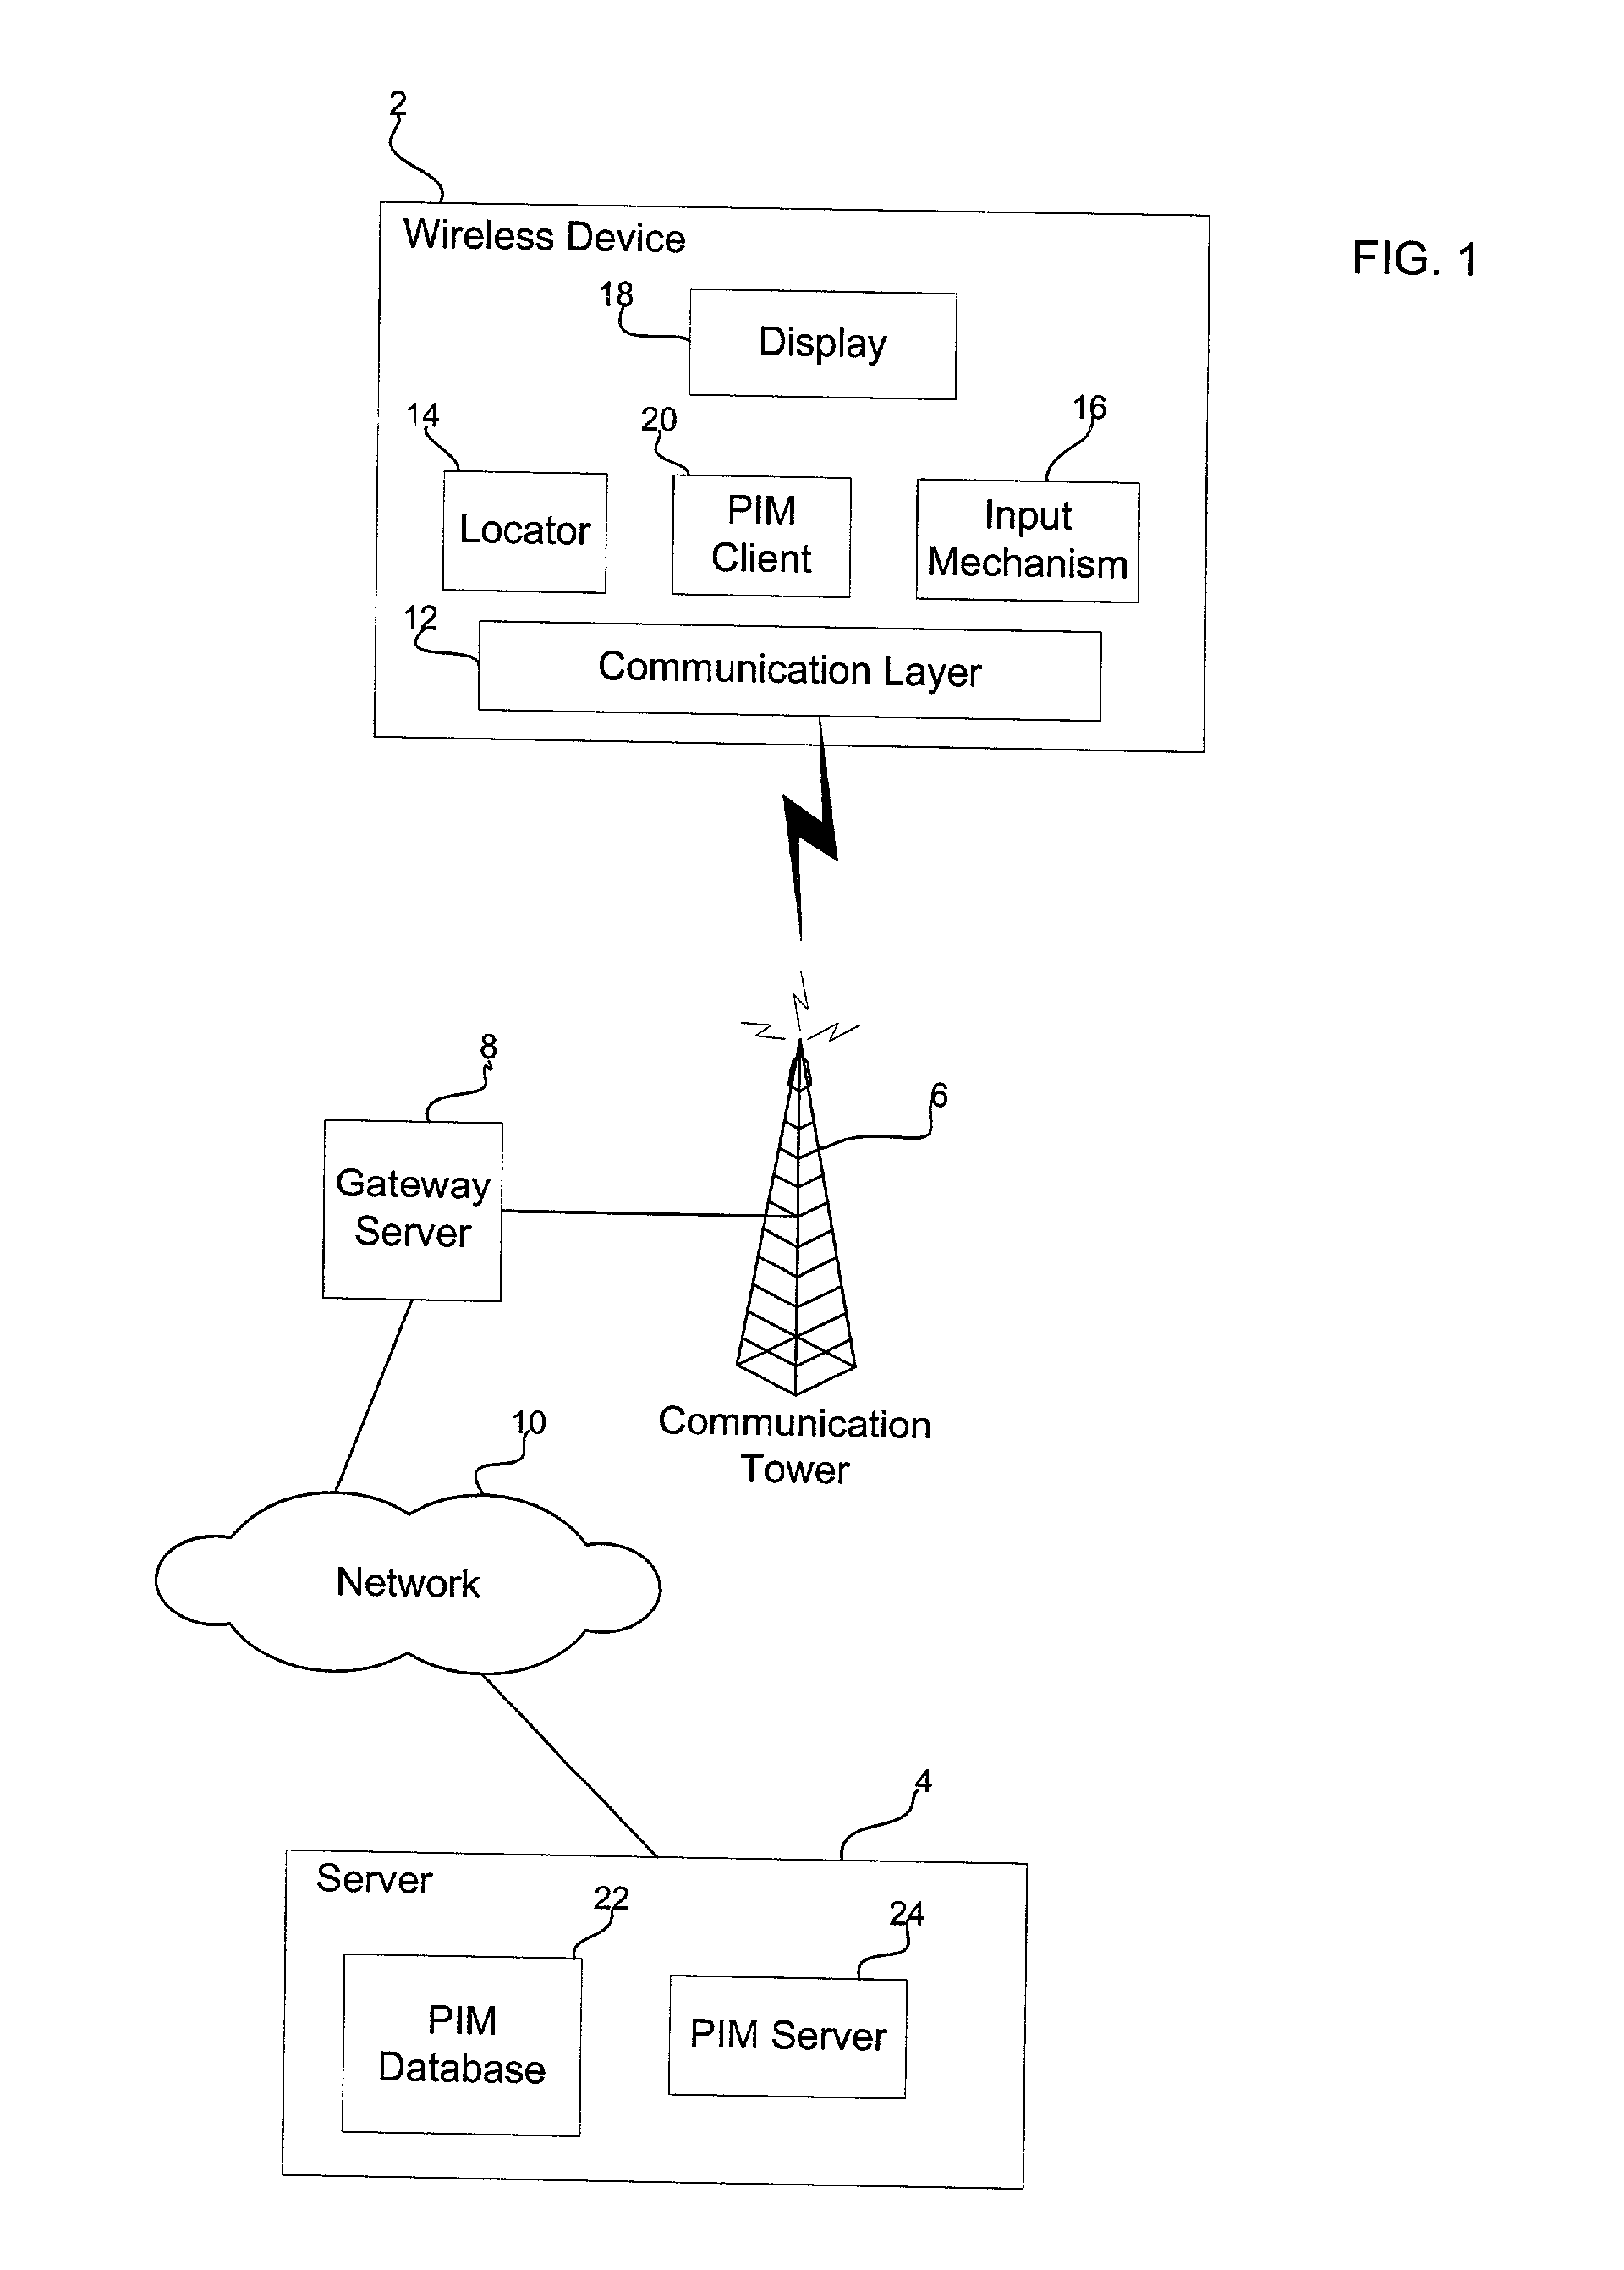 Method, system, and program for providing personal preference information when scheduling events